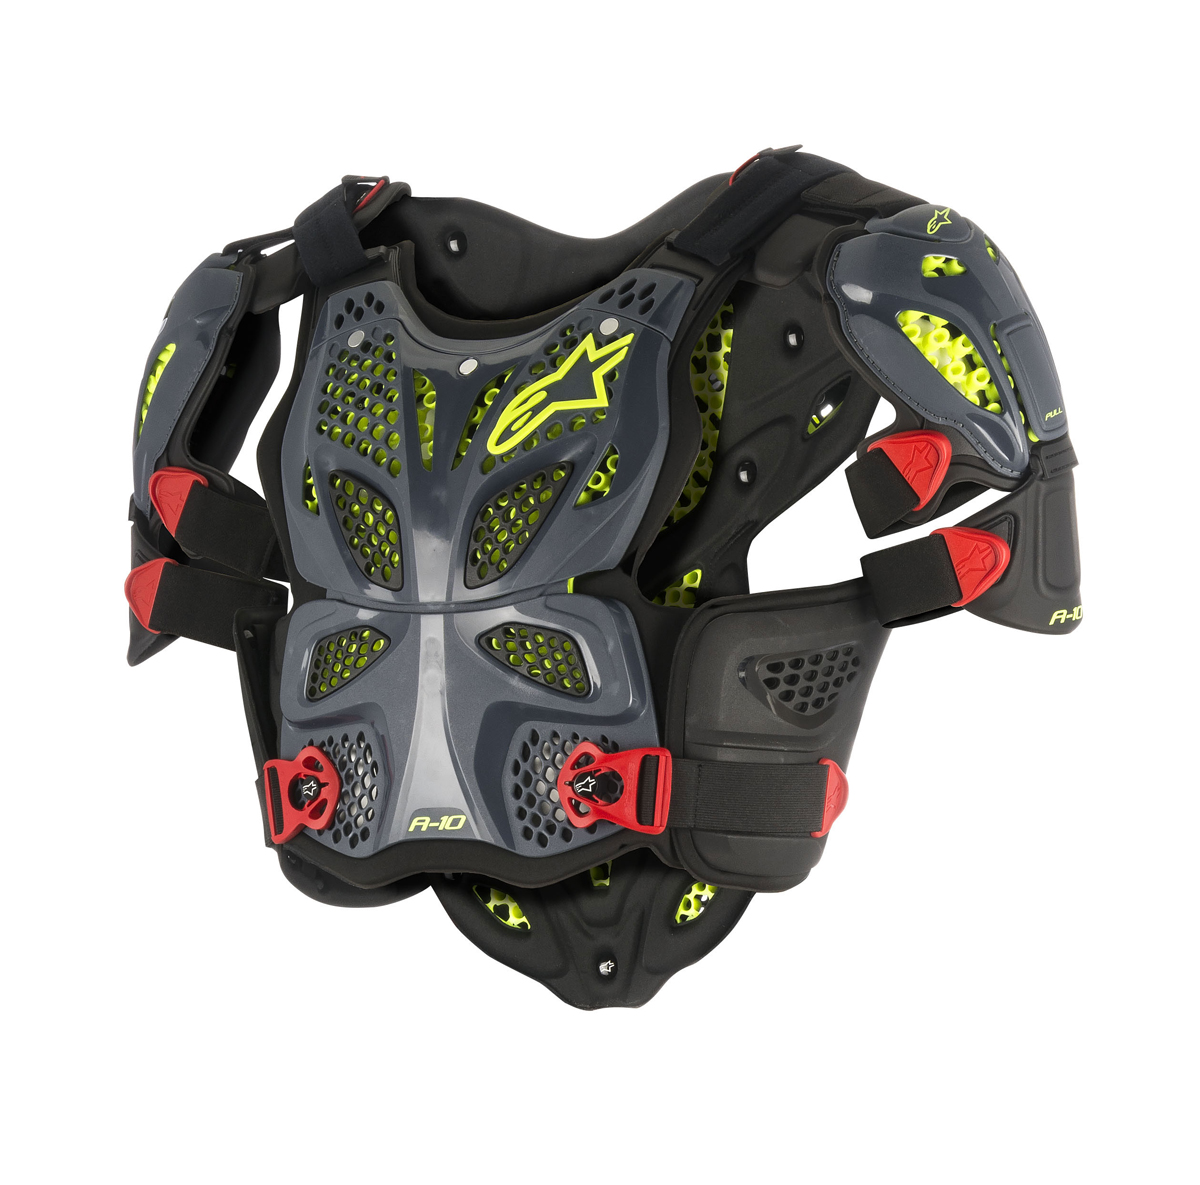 Alpinestars MX/Motocross A-10 Full Chest/Back Protector Roost Guard (Anthracite/Black/Red/Yellow)